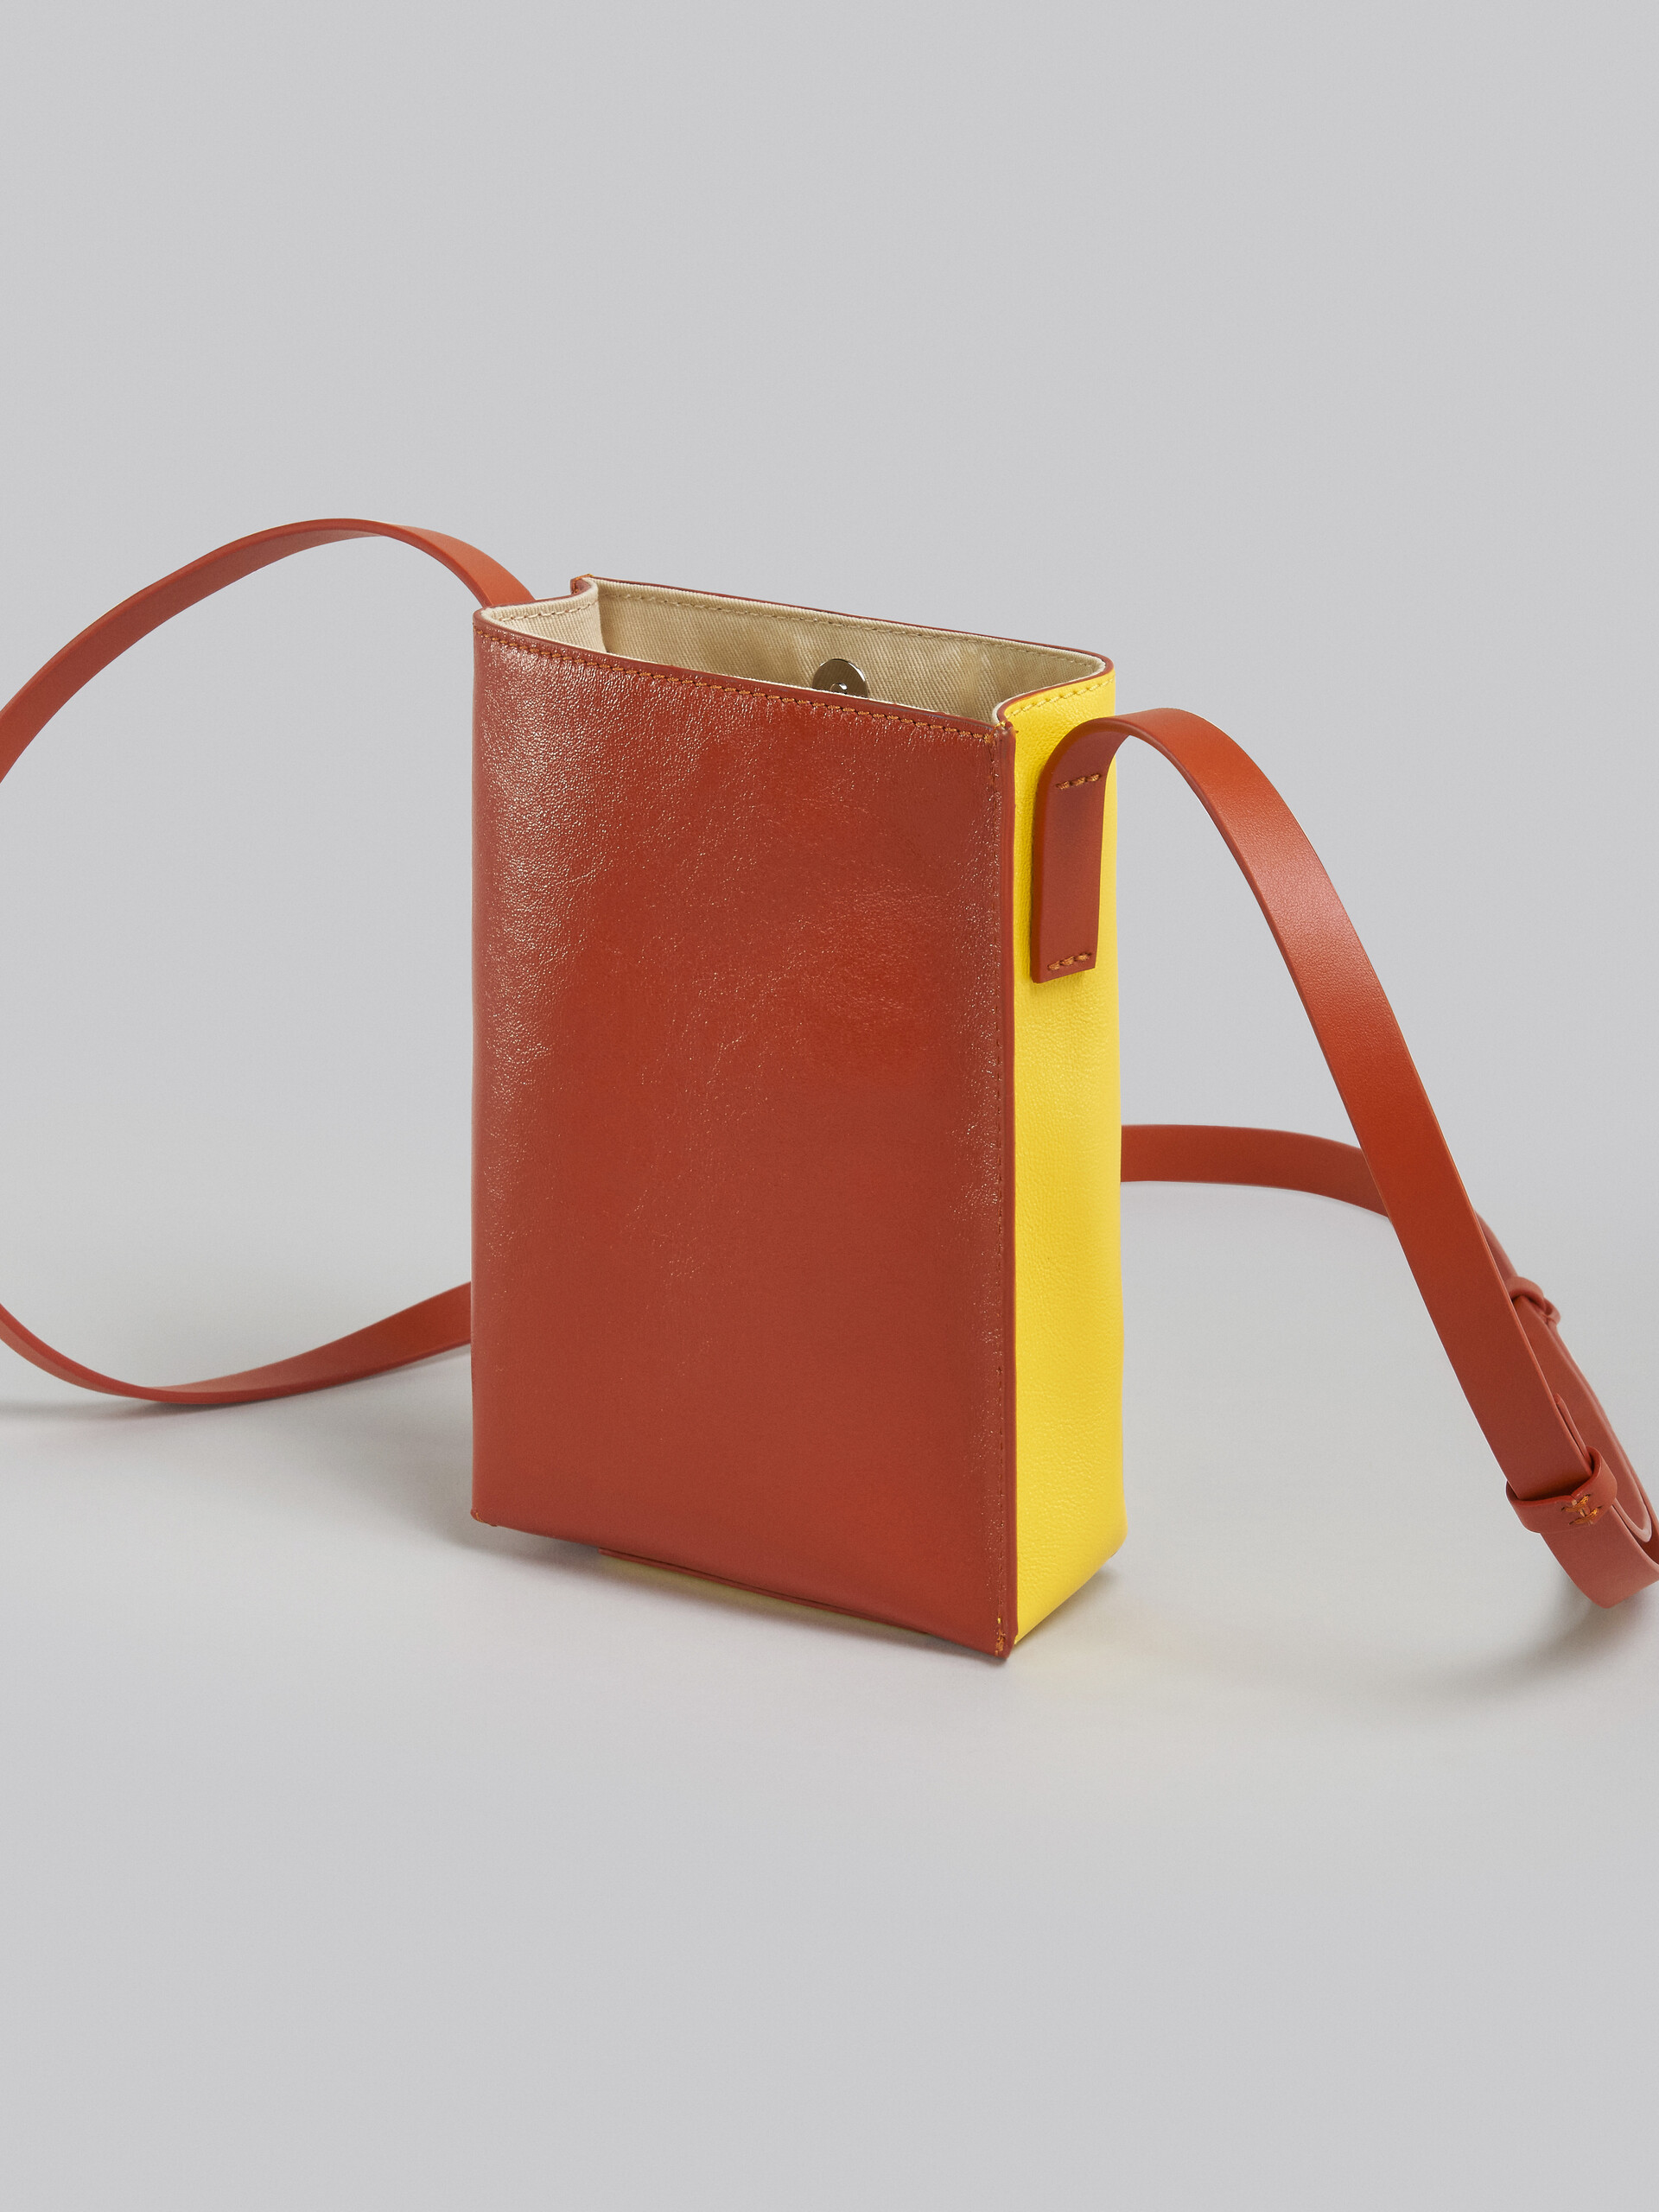 MUSEO SOFT small bag in brown and yellow leather - Shoulder Bags - Image 5